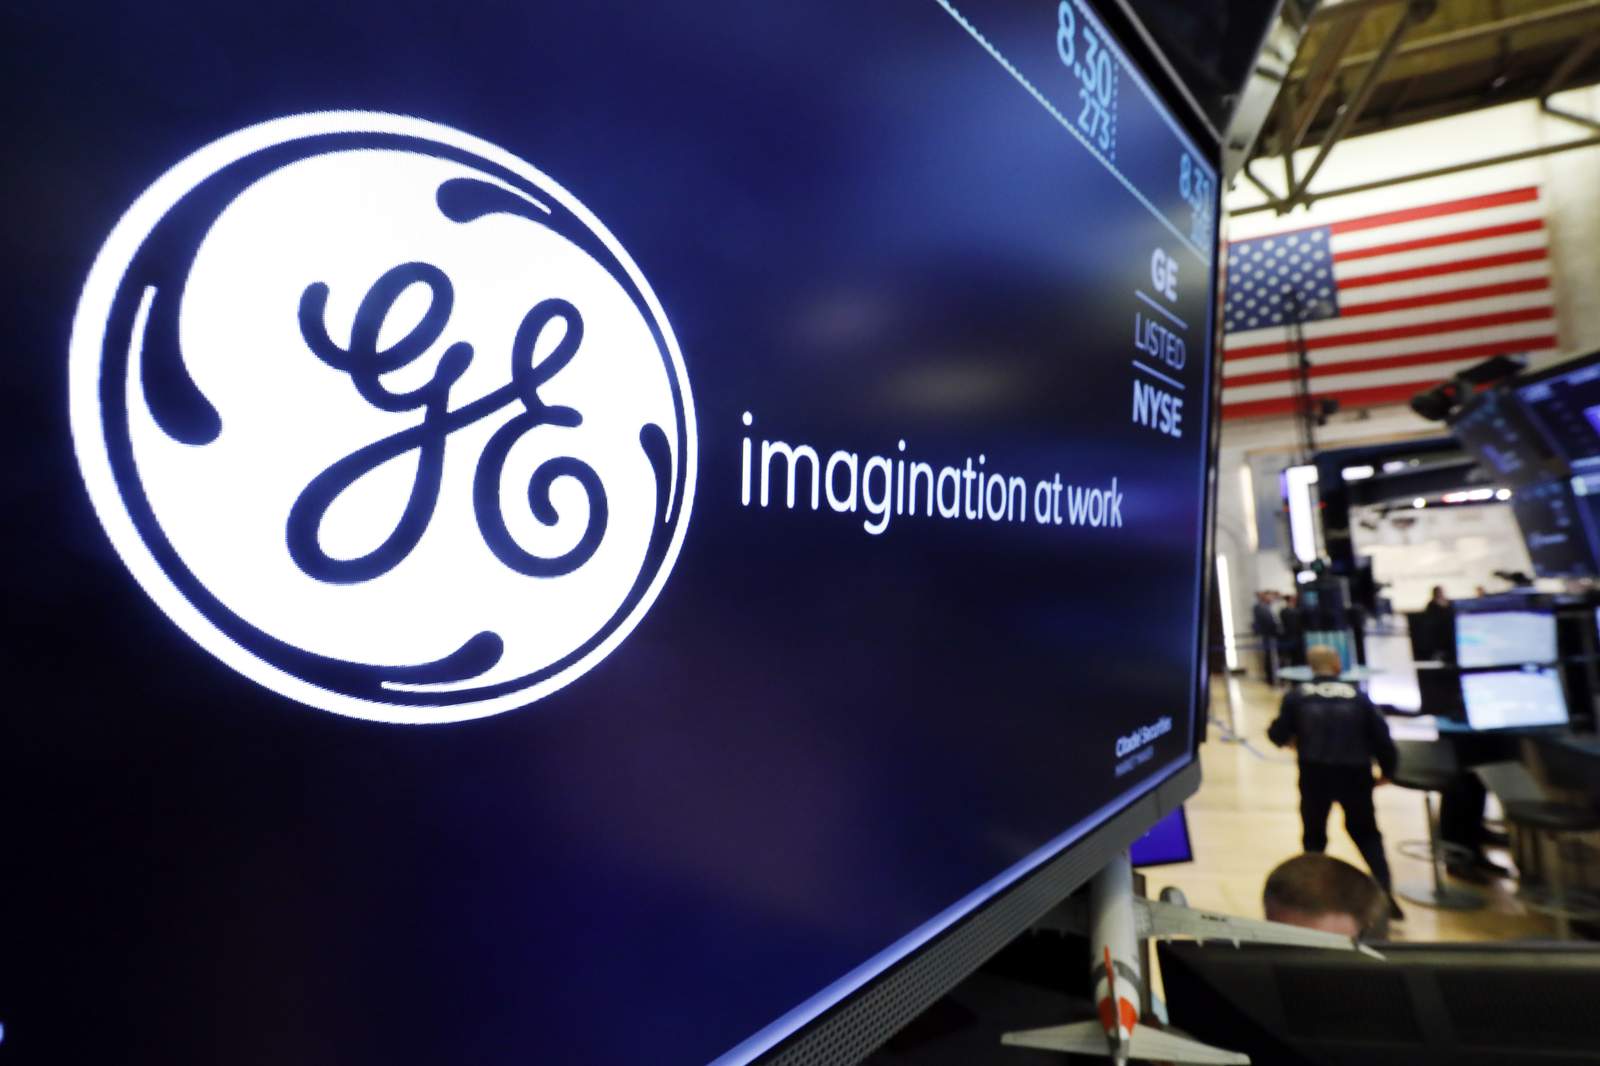 General Electric's 3Q adjusted profit surprises Wall Street